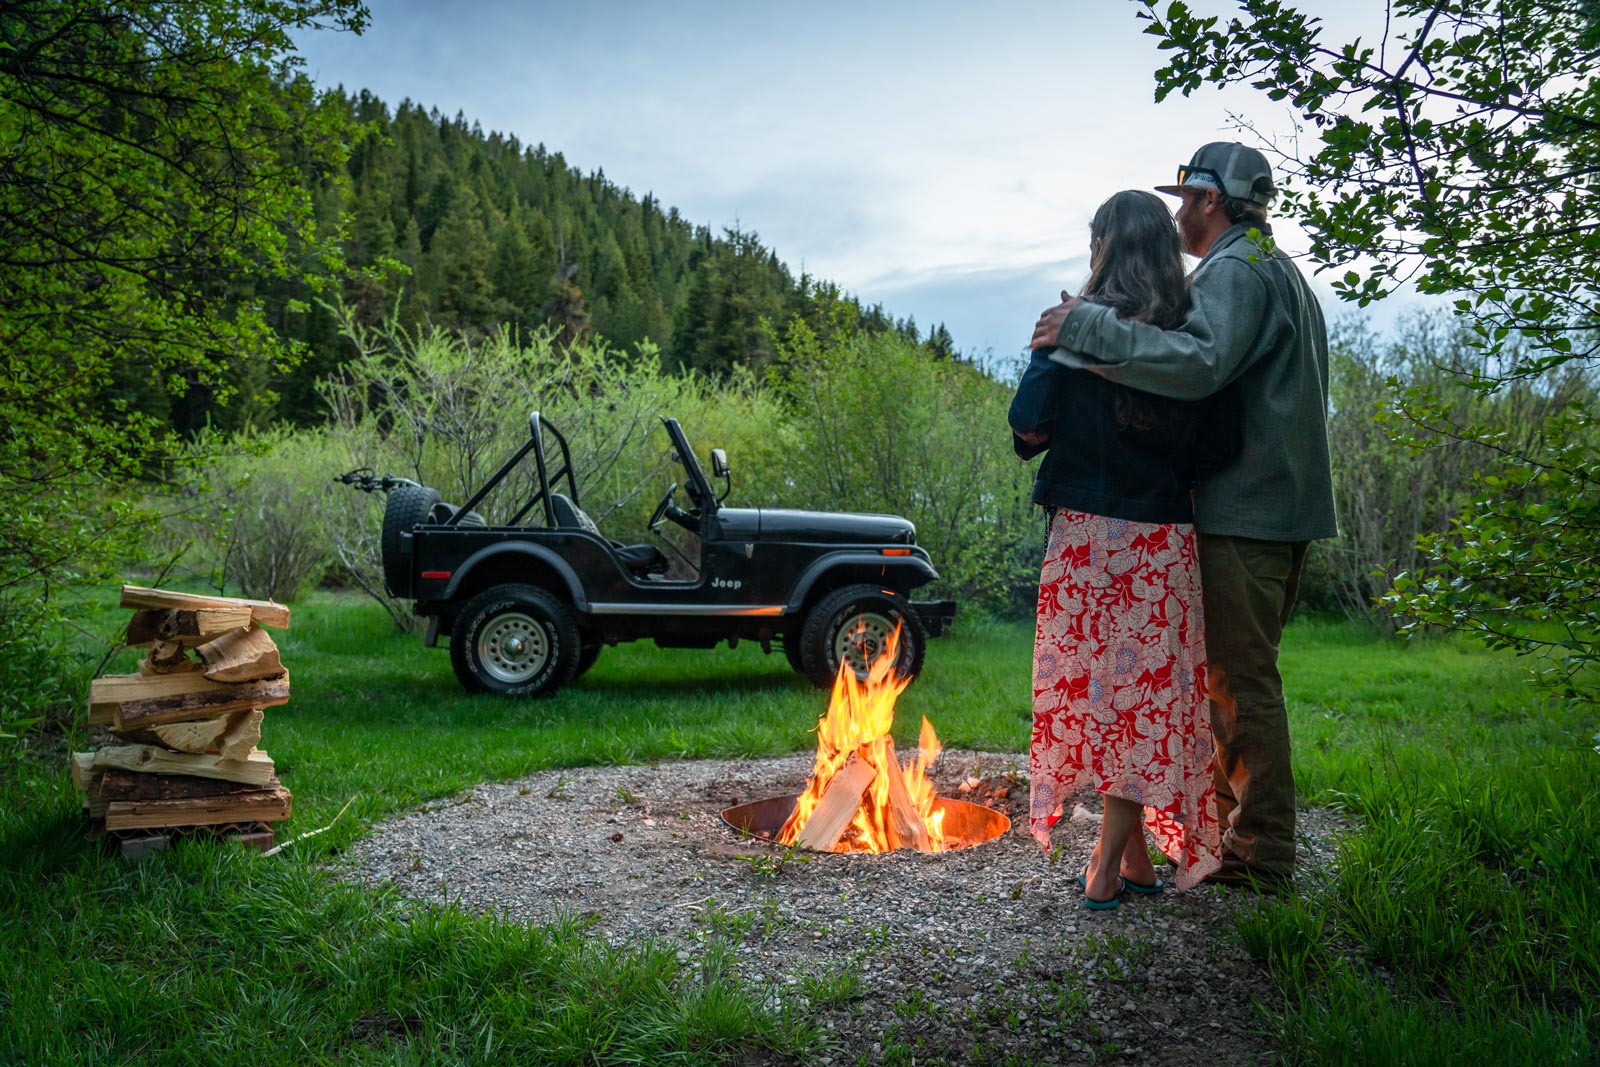 Private Campfire - Jackson Hole Cabins Glamping Tents